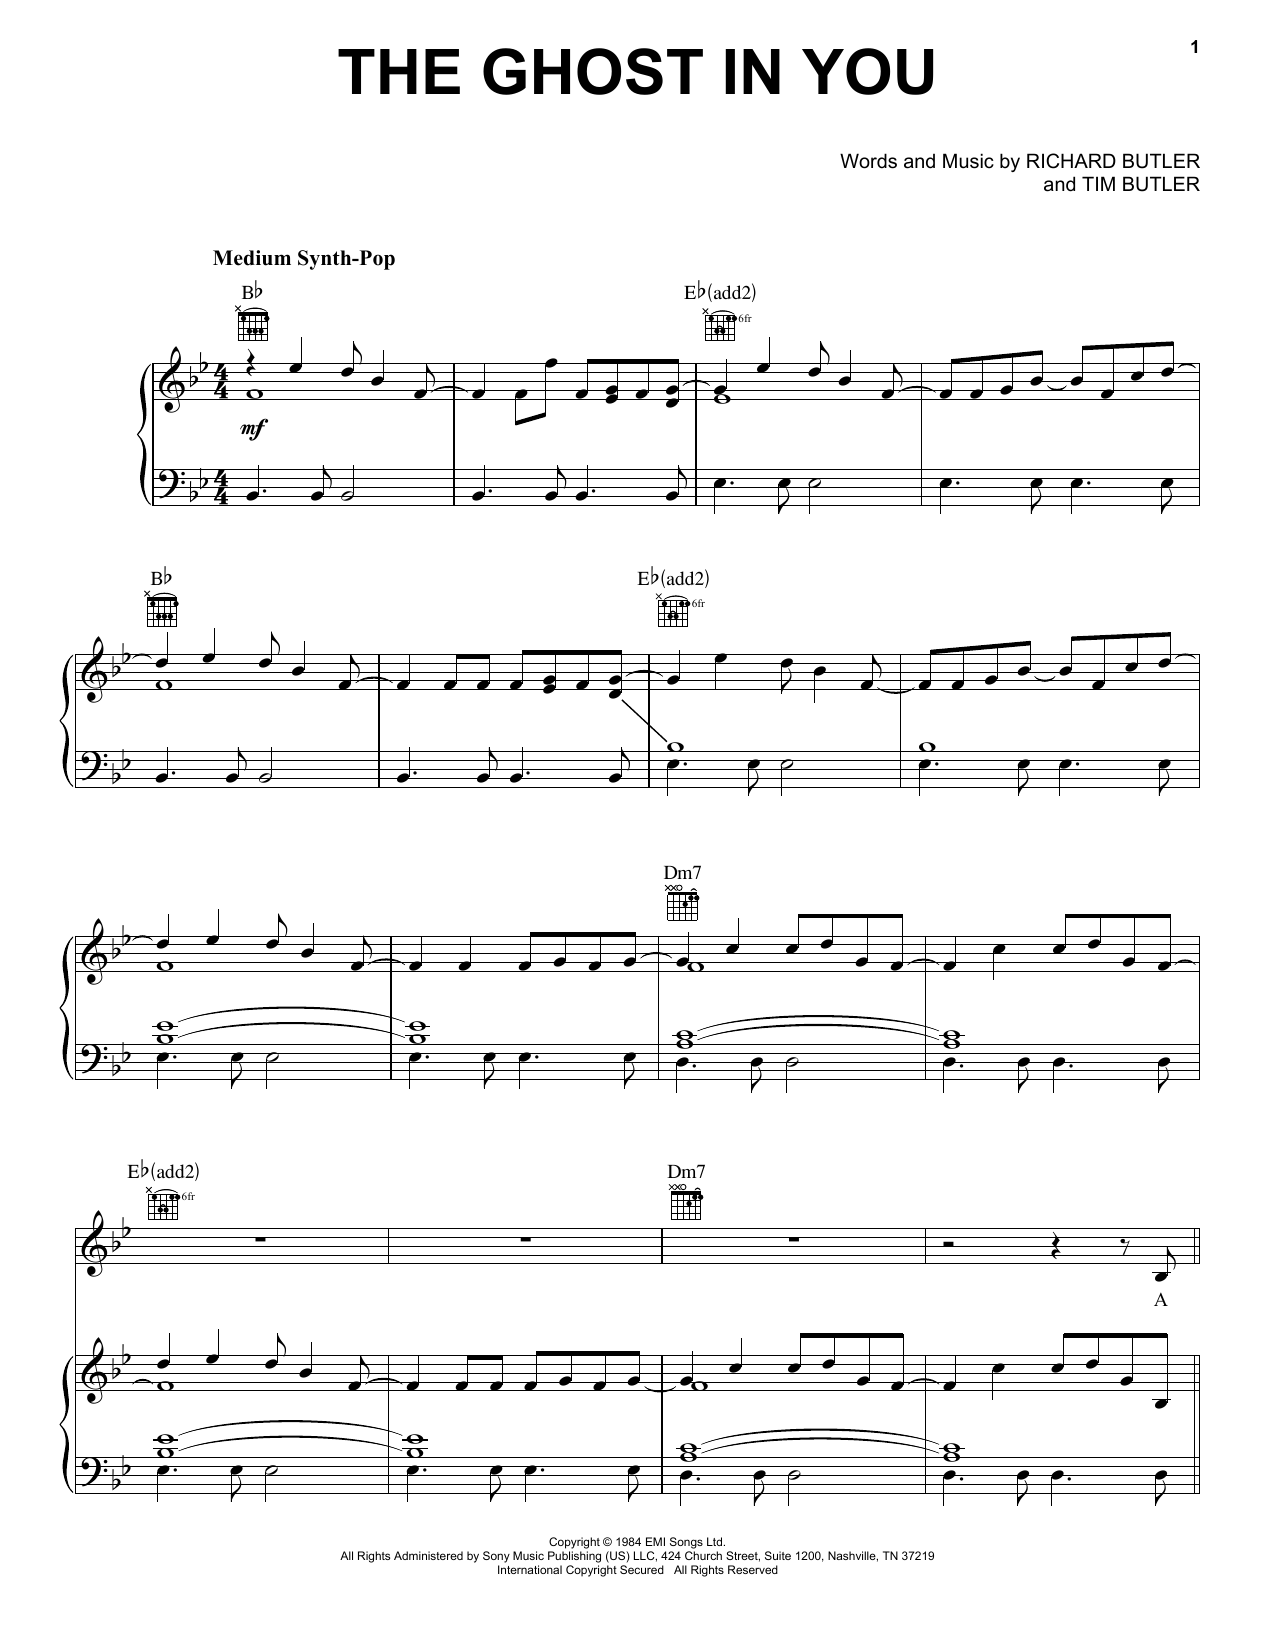 Psychedelic Furs The Ghost In You sheet music notes and chords. Download Printable PDF.